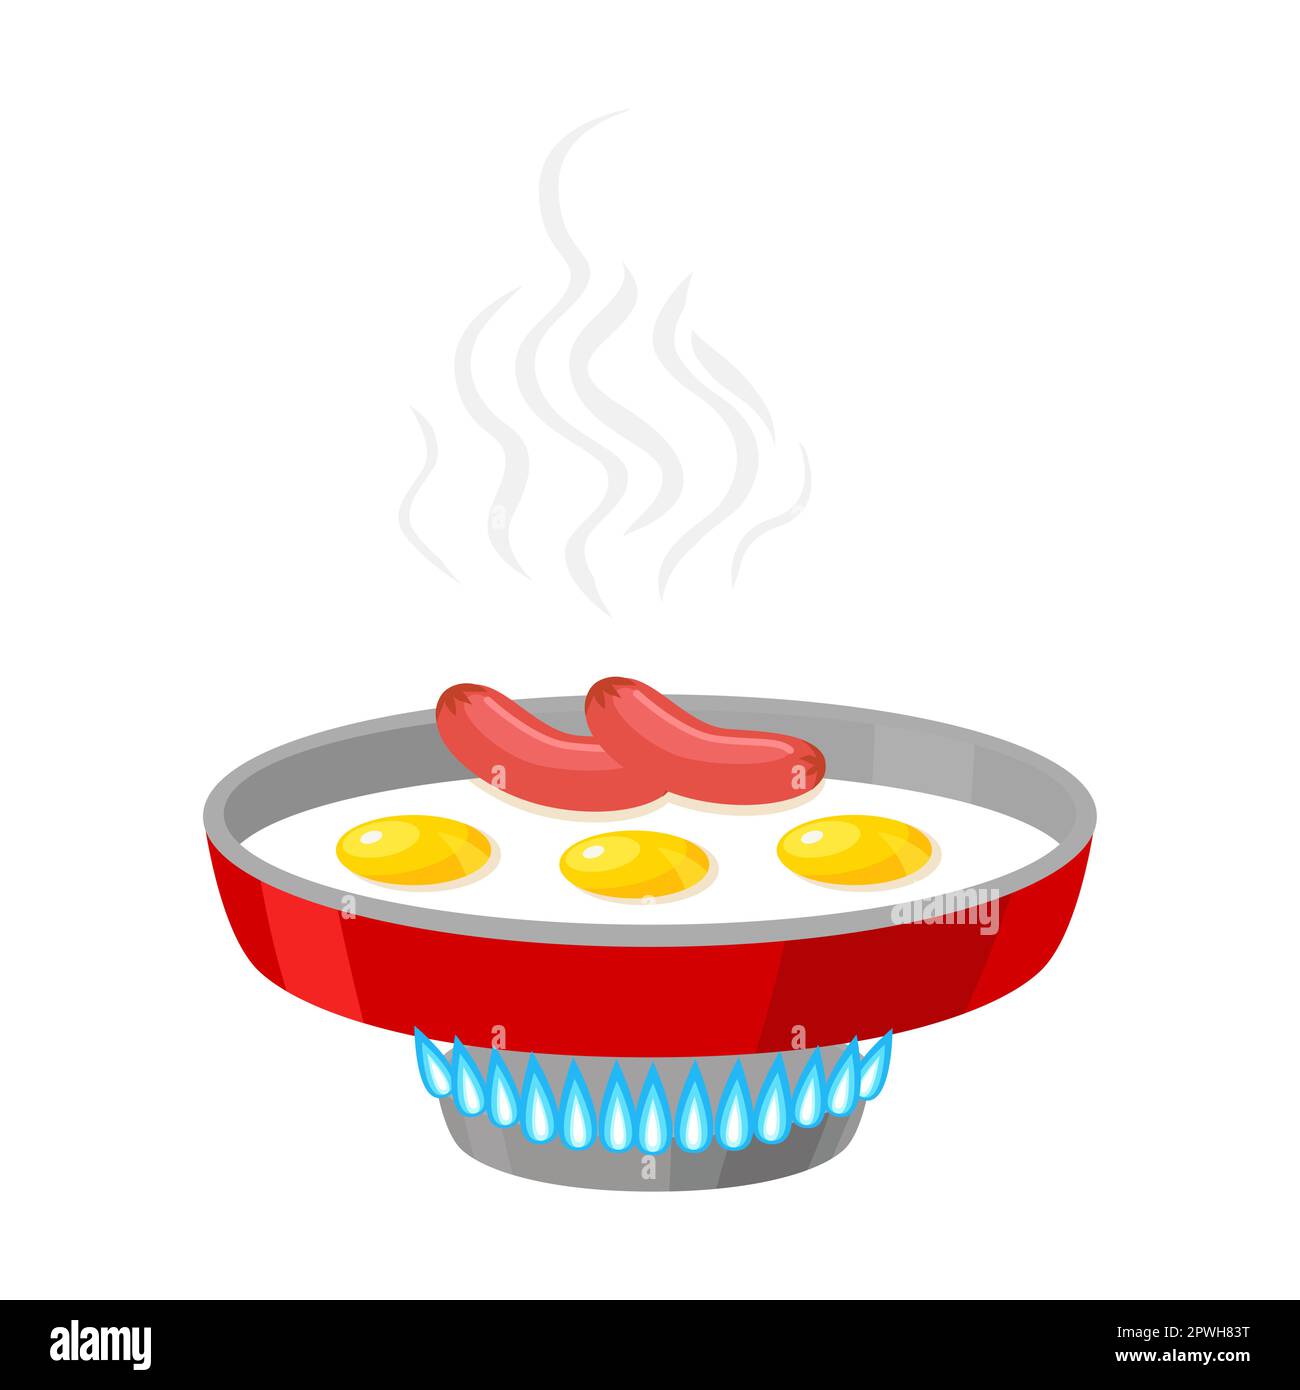 Cooking pan with fried eggs and sausages on gas stove cartoon illustration. Boiling water in kettle, frying dishes on fire. Saucepan with hot soup Stock Vector